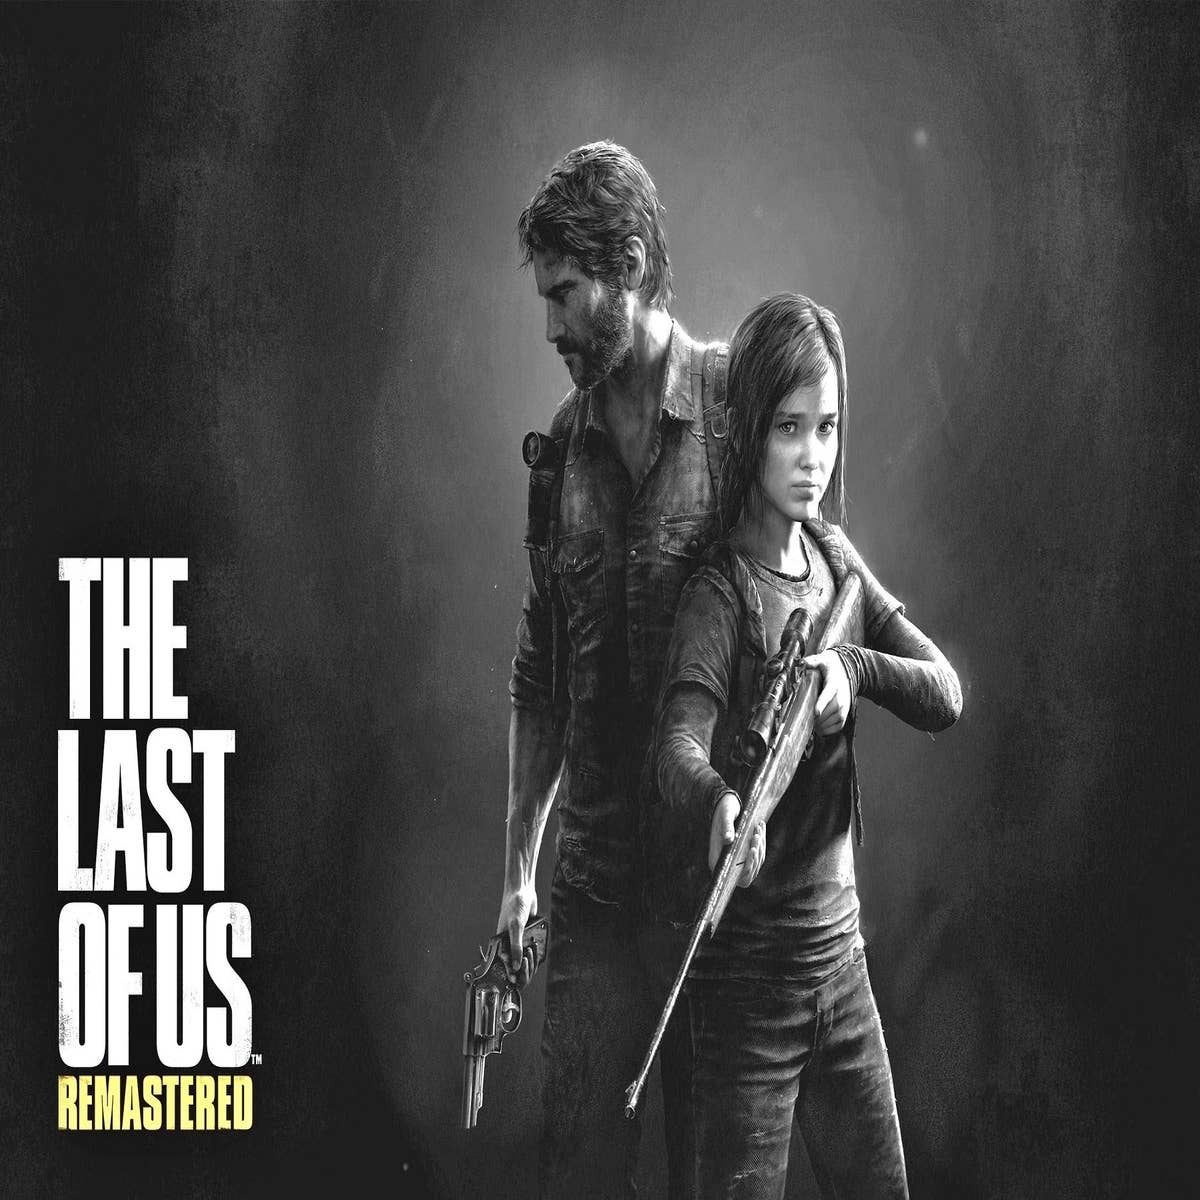 The Last of Us already runs at 4K in the latest version of the